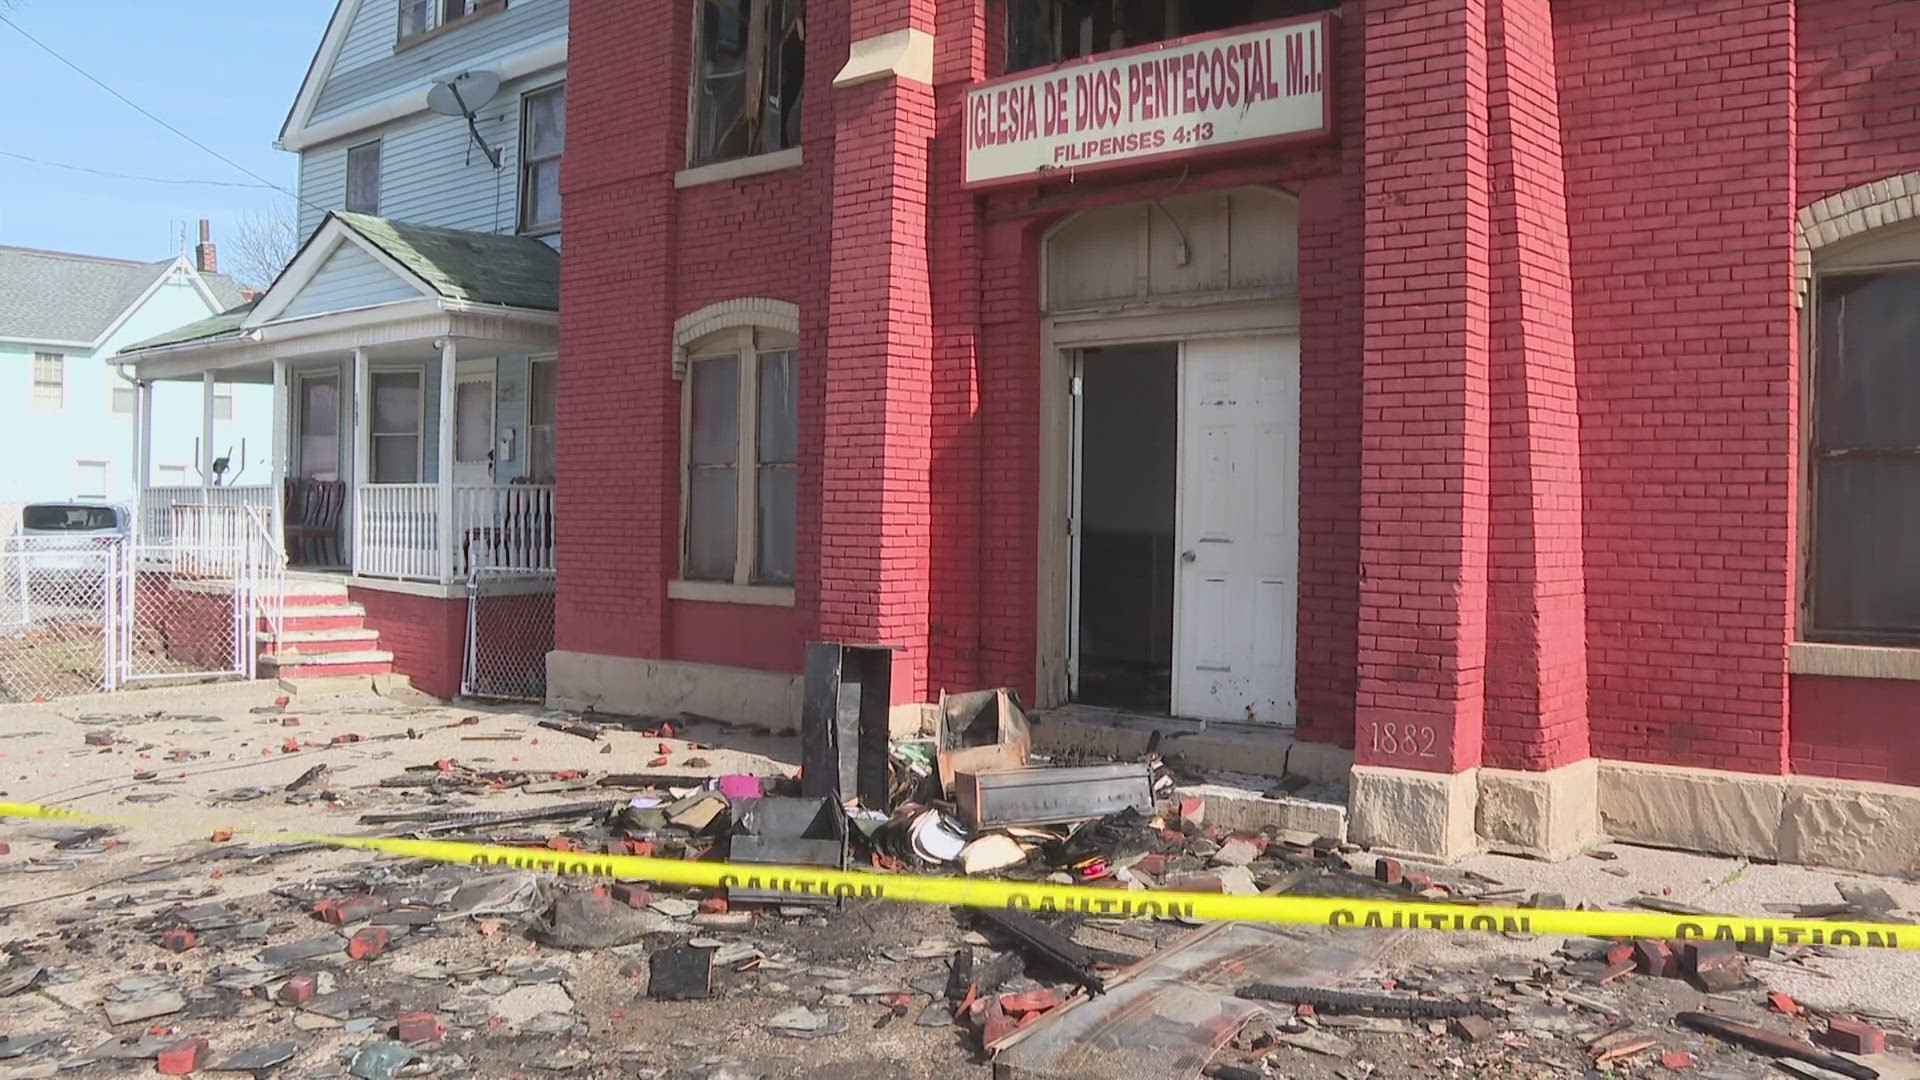 Officials say nearly 50 firefighters from 10 different companies responded to the blaze at the 156-year-old Iglesia De Dios Pentecostal Temple.